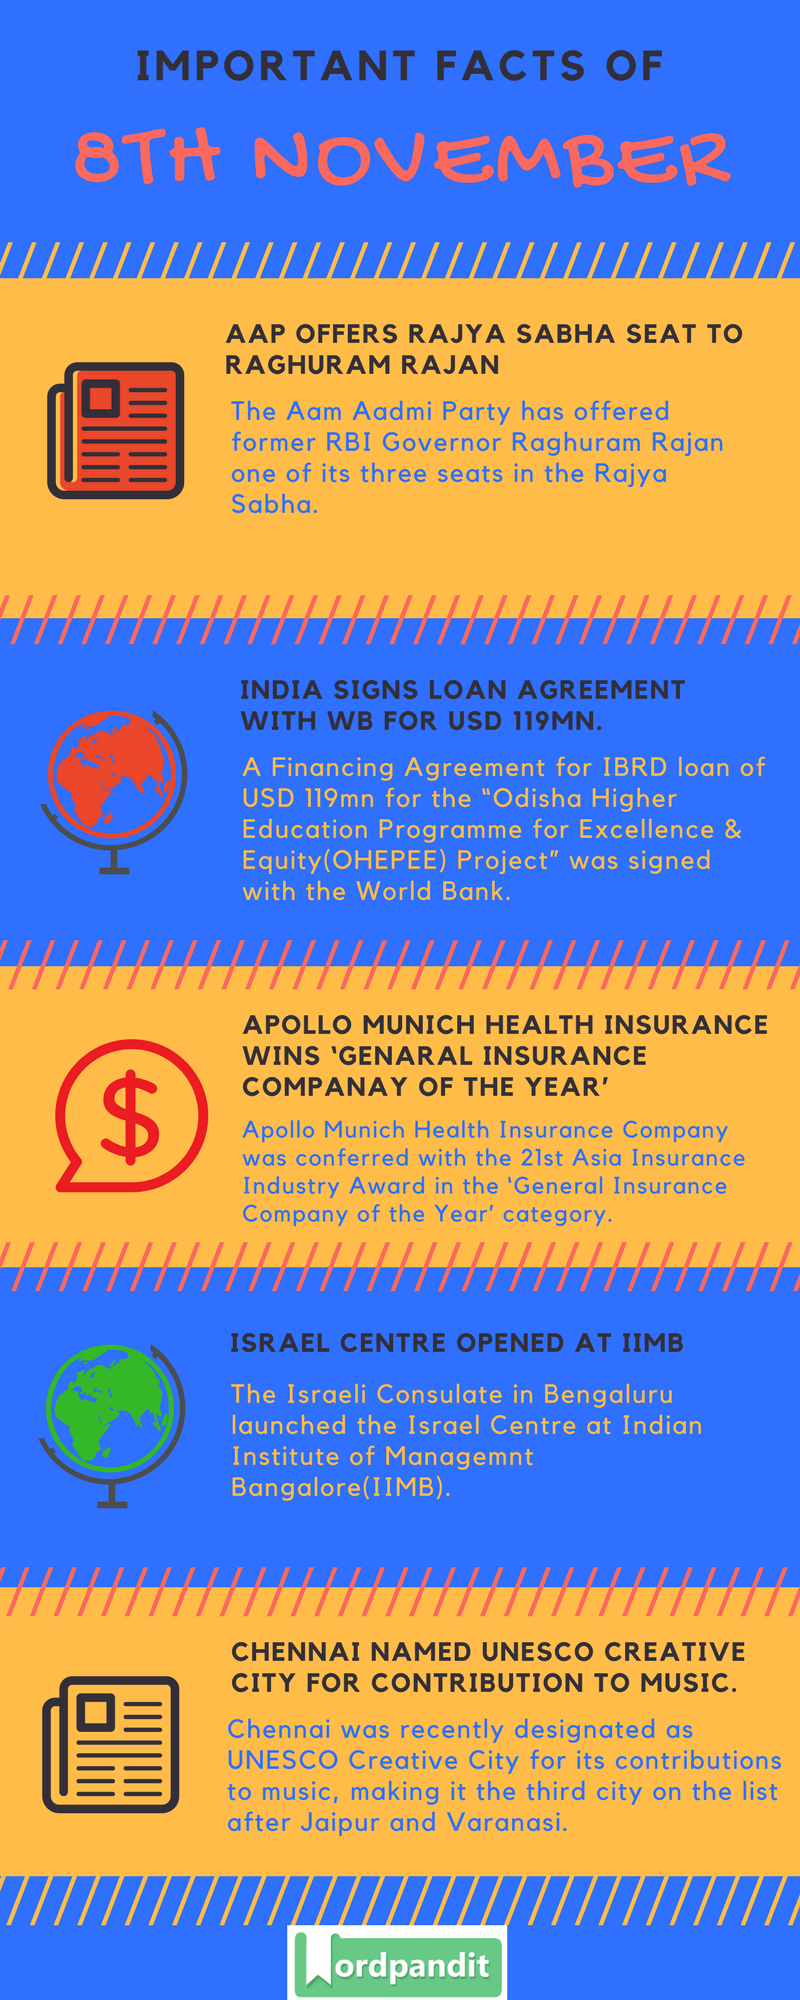 Daily-Current-Affairs-8-november-2017-Current-Affairs-Quiz-november-8-2017-Current-Affairs-Infographic